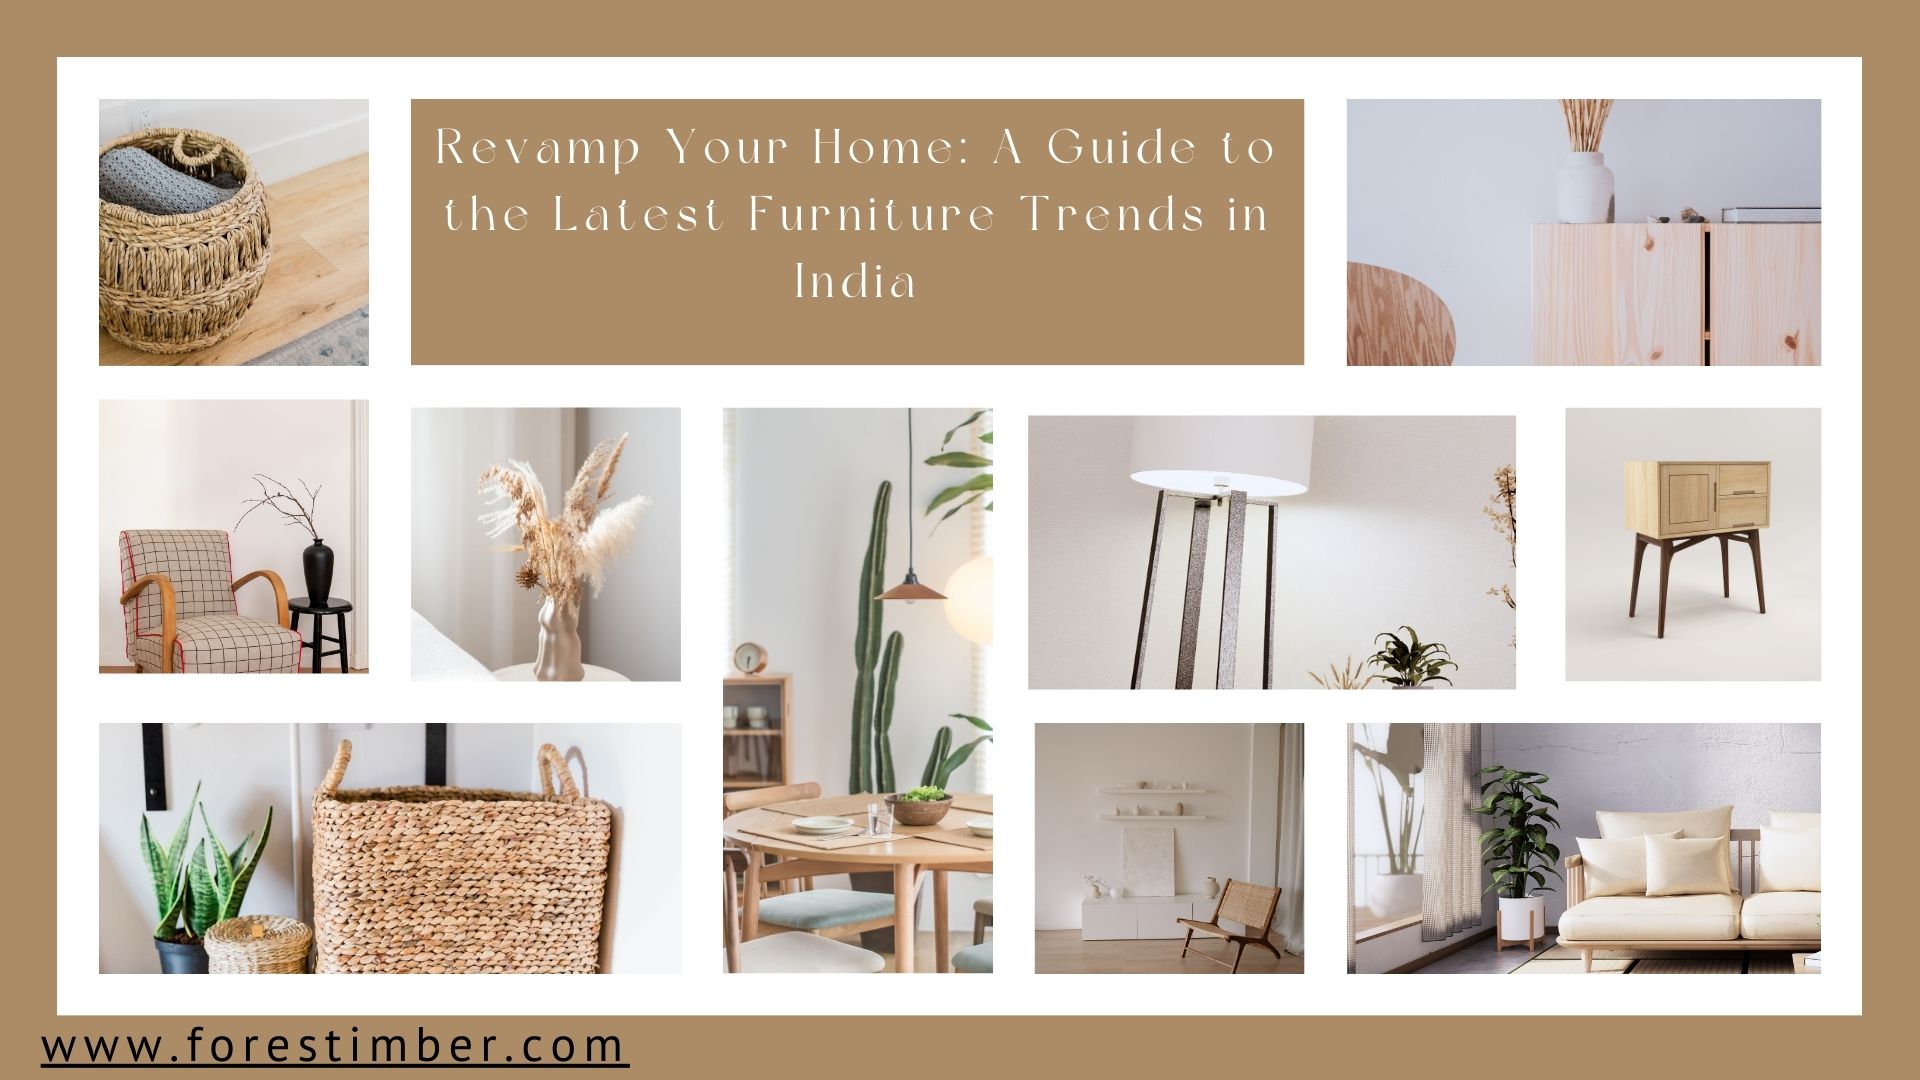 Revamp Your Home: A Guide to the Latest Furniture Trends in India